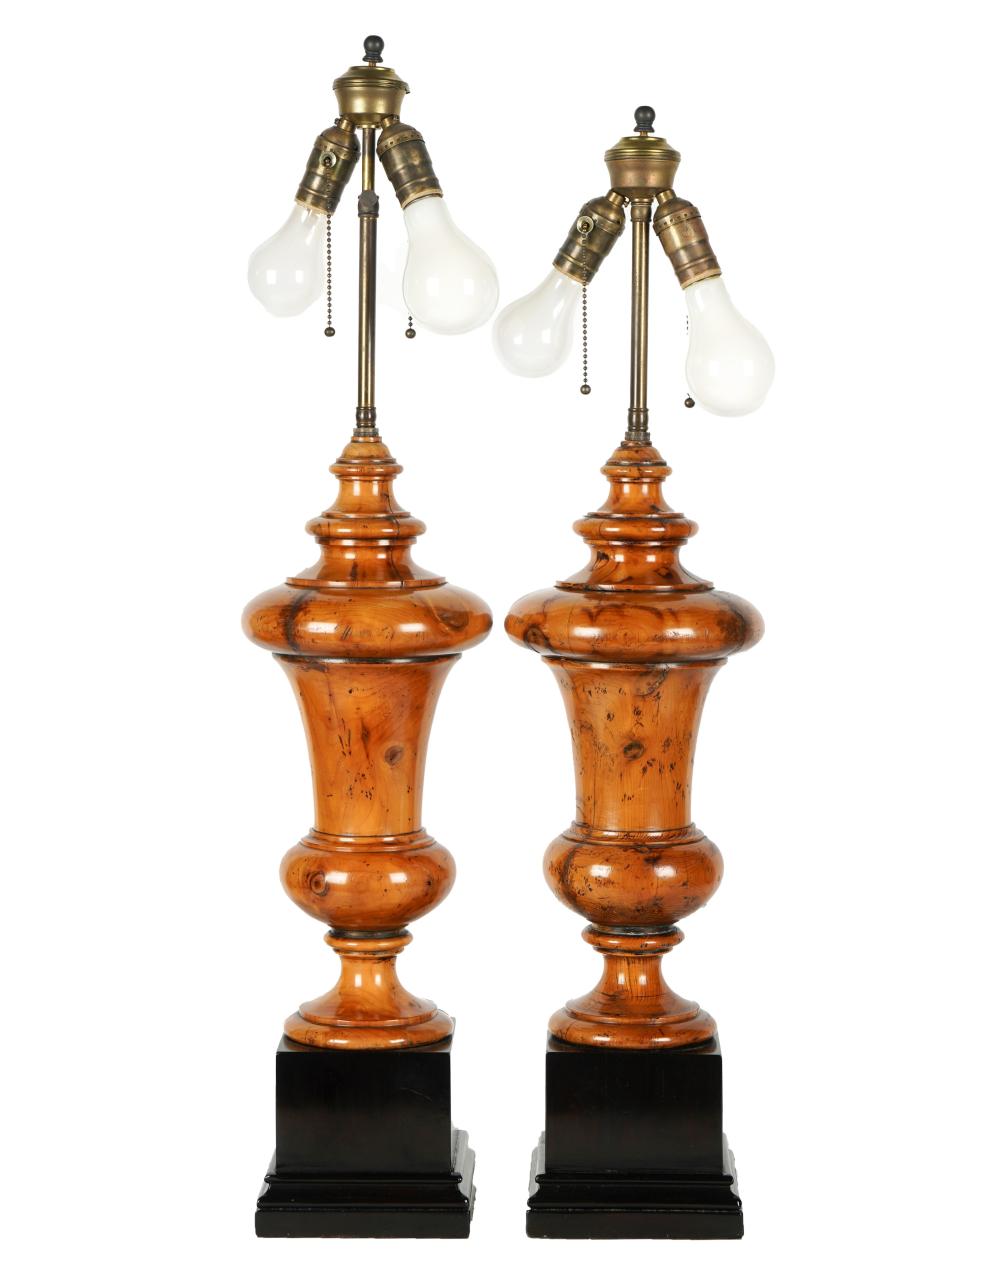 PAIR OF TURNED WOOD TABLE LAMPSeach 300843